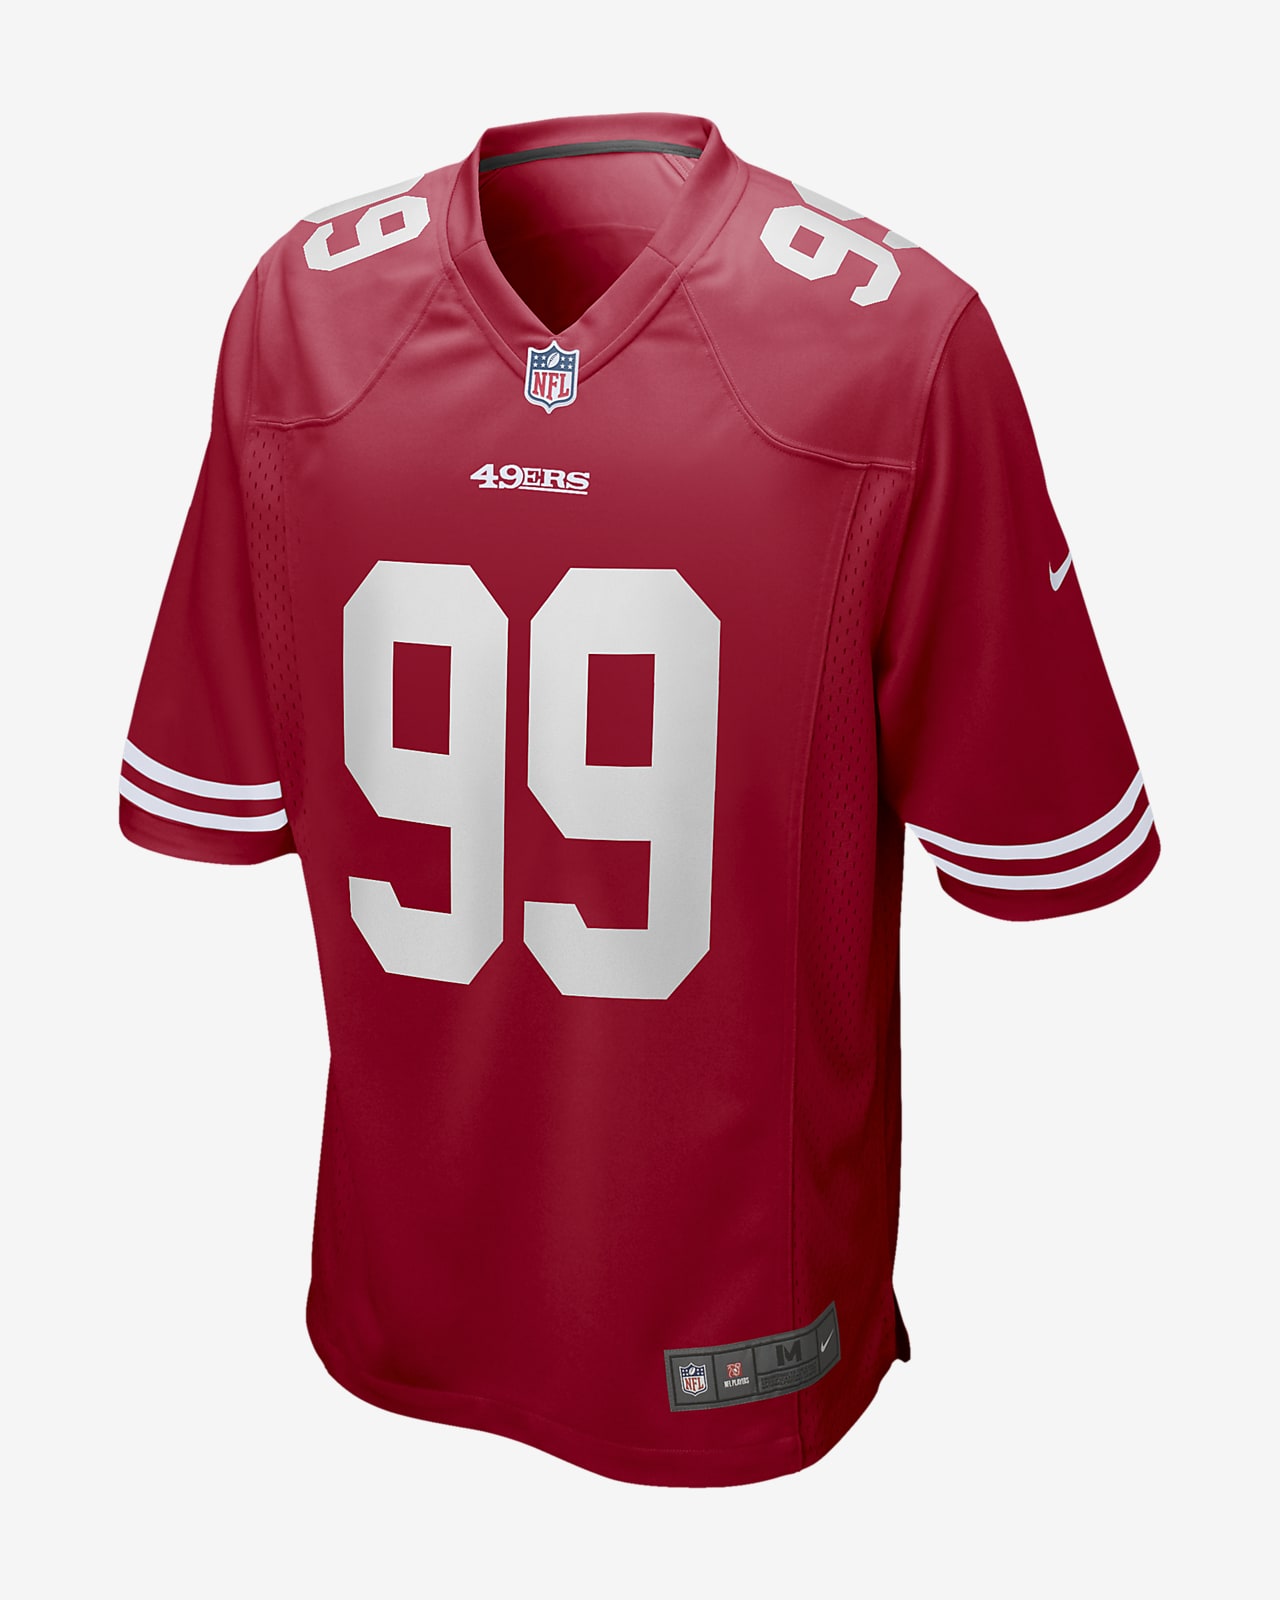 where to buy 49ers gear in sf